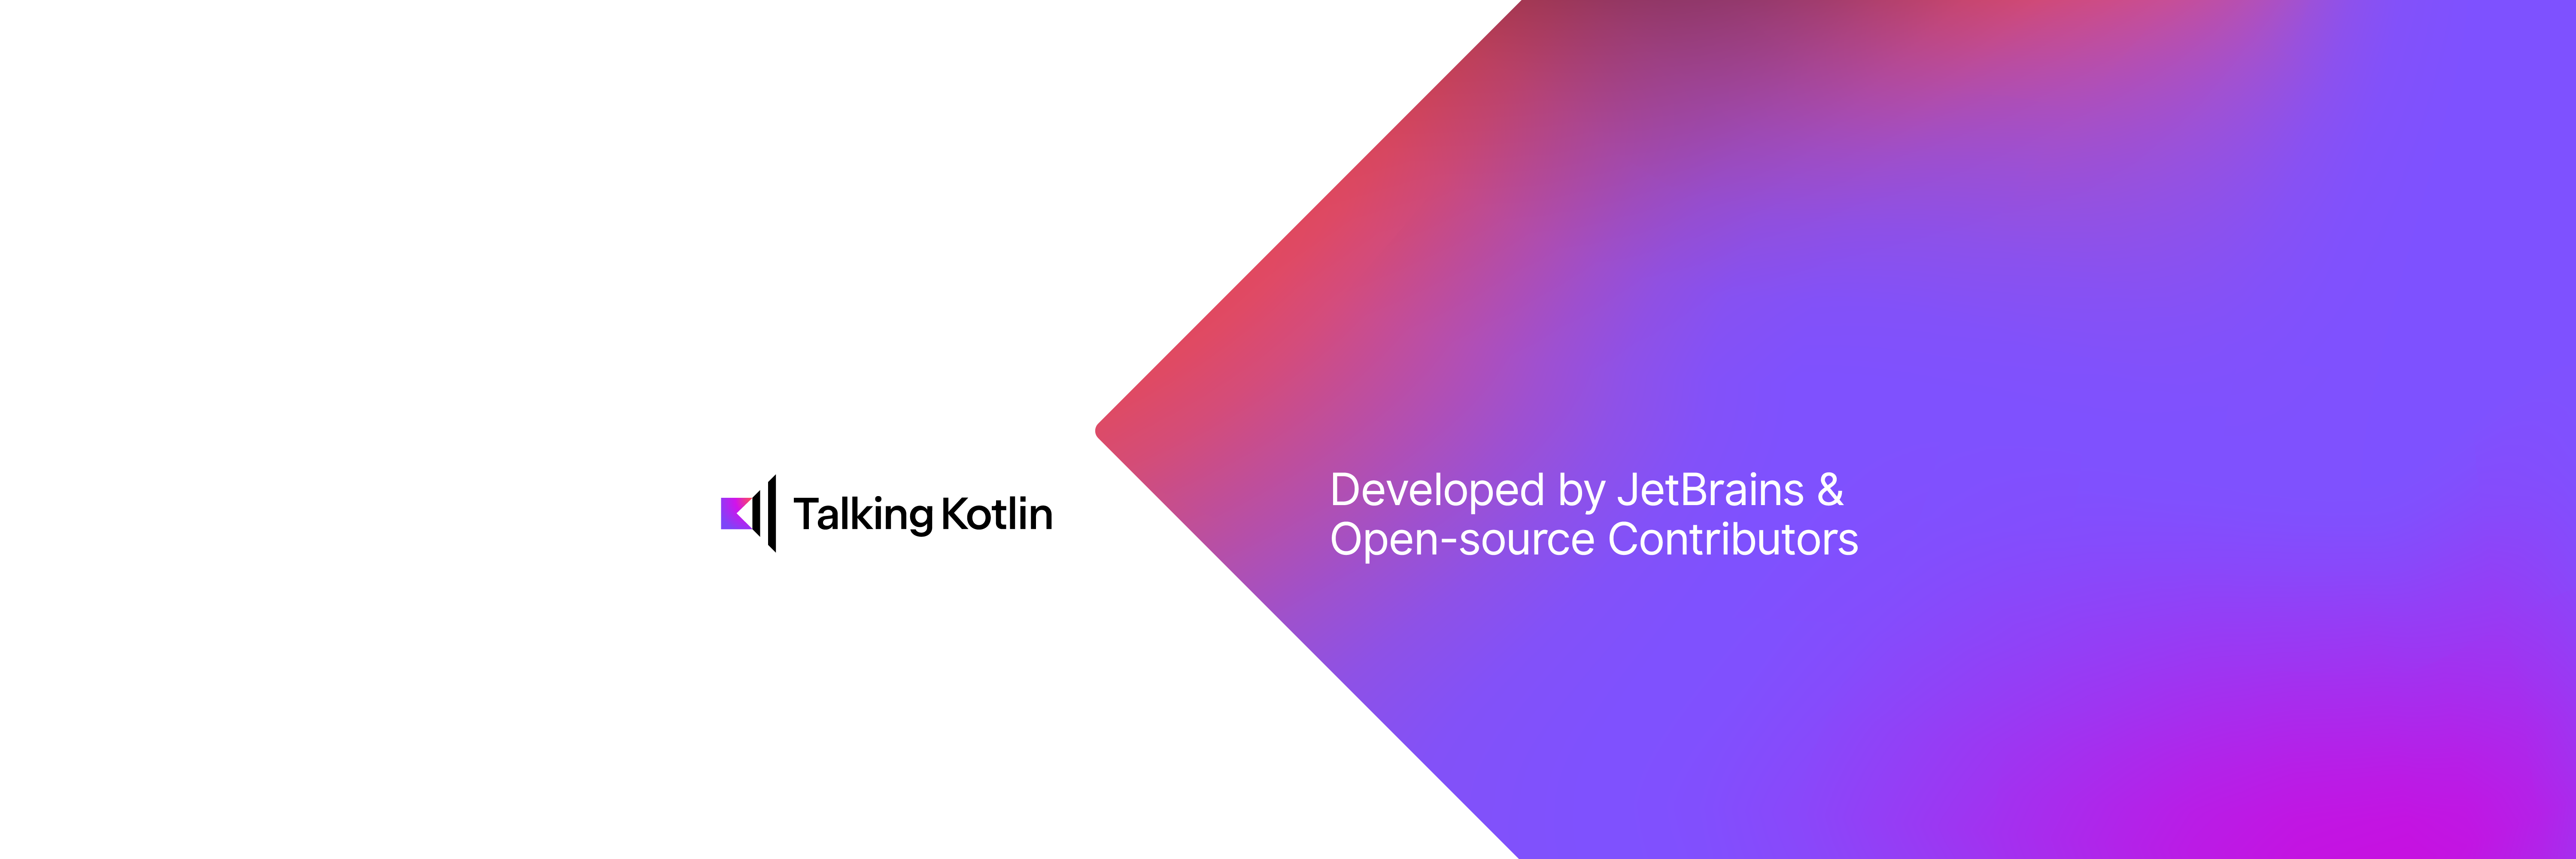 What Does the Kotlin Foundation Do?